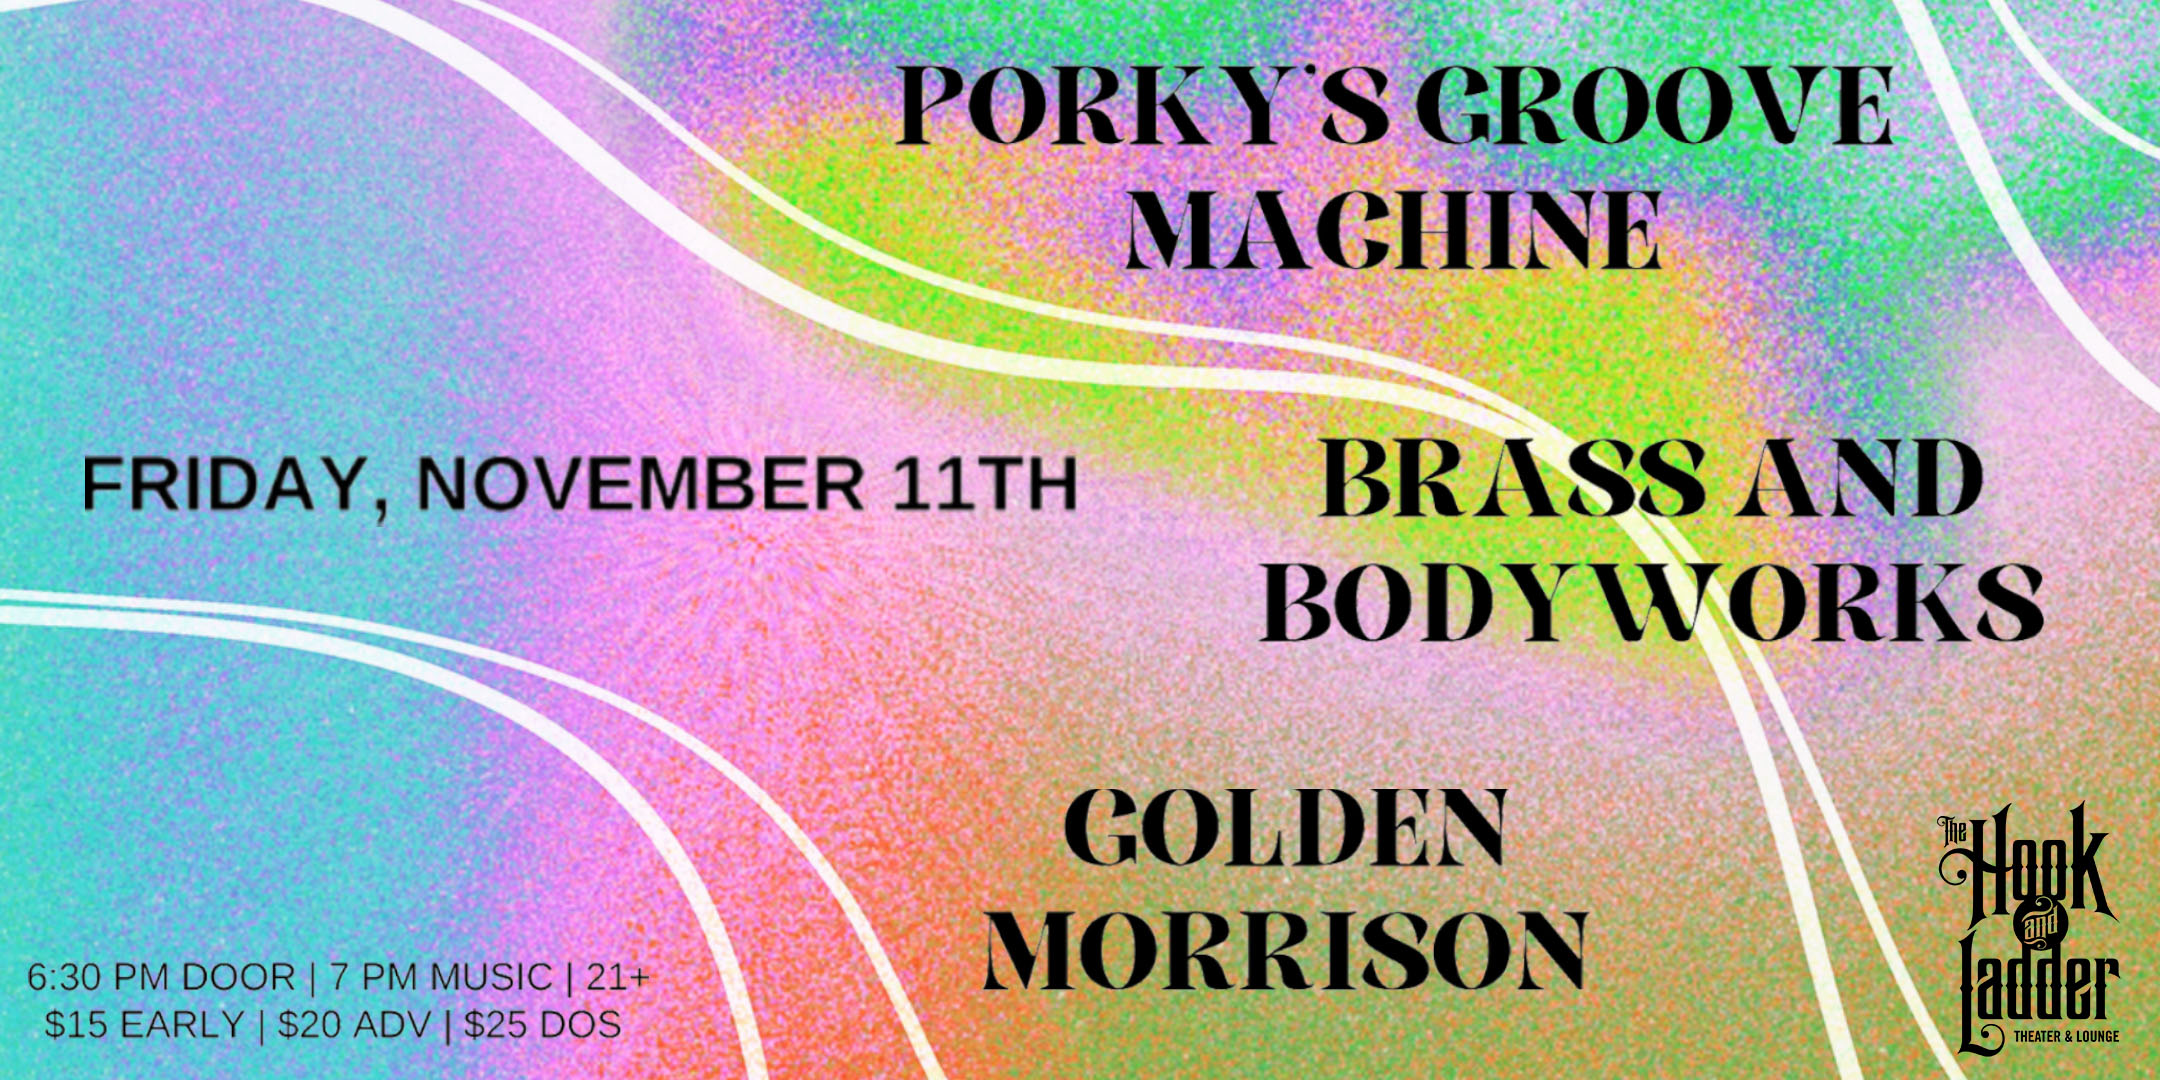 Brass & Bodyworks + Porky’s Groove Machine + Golden Morrison Friday, November 11, 2022 At The Hook and Ladder Theater Doors 6:30pm / Music 7:00pm / 21+ $15 Early Bird / $20 Advance / $25 Day of Show